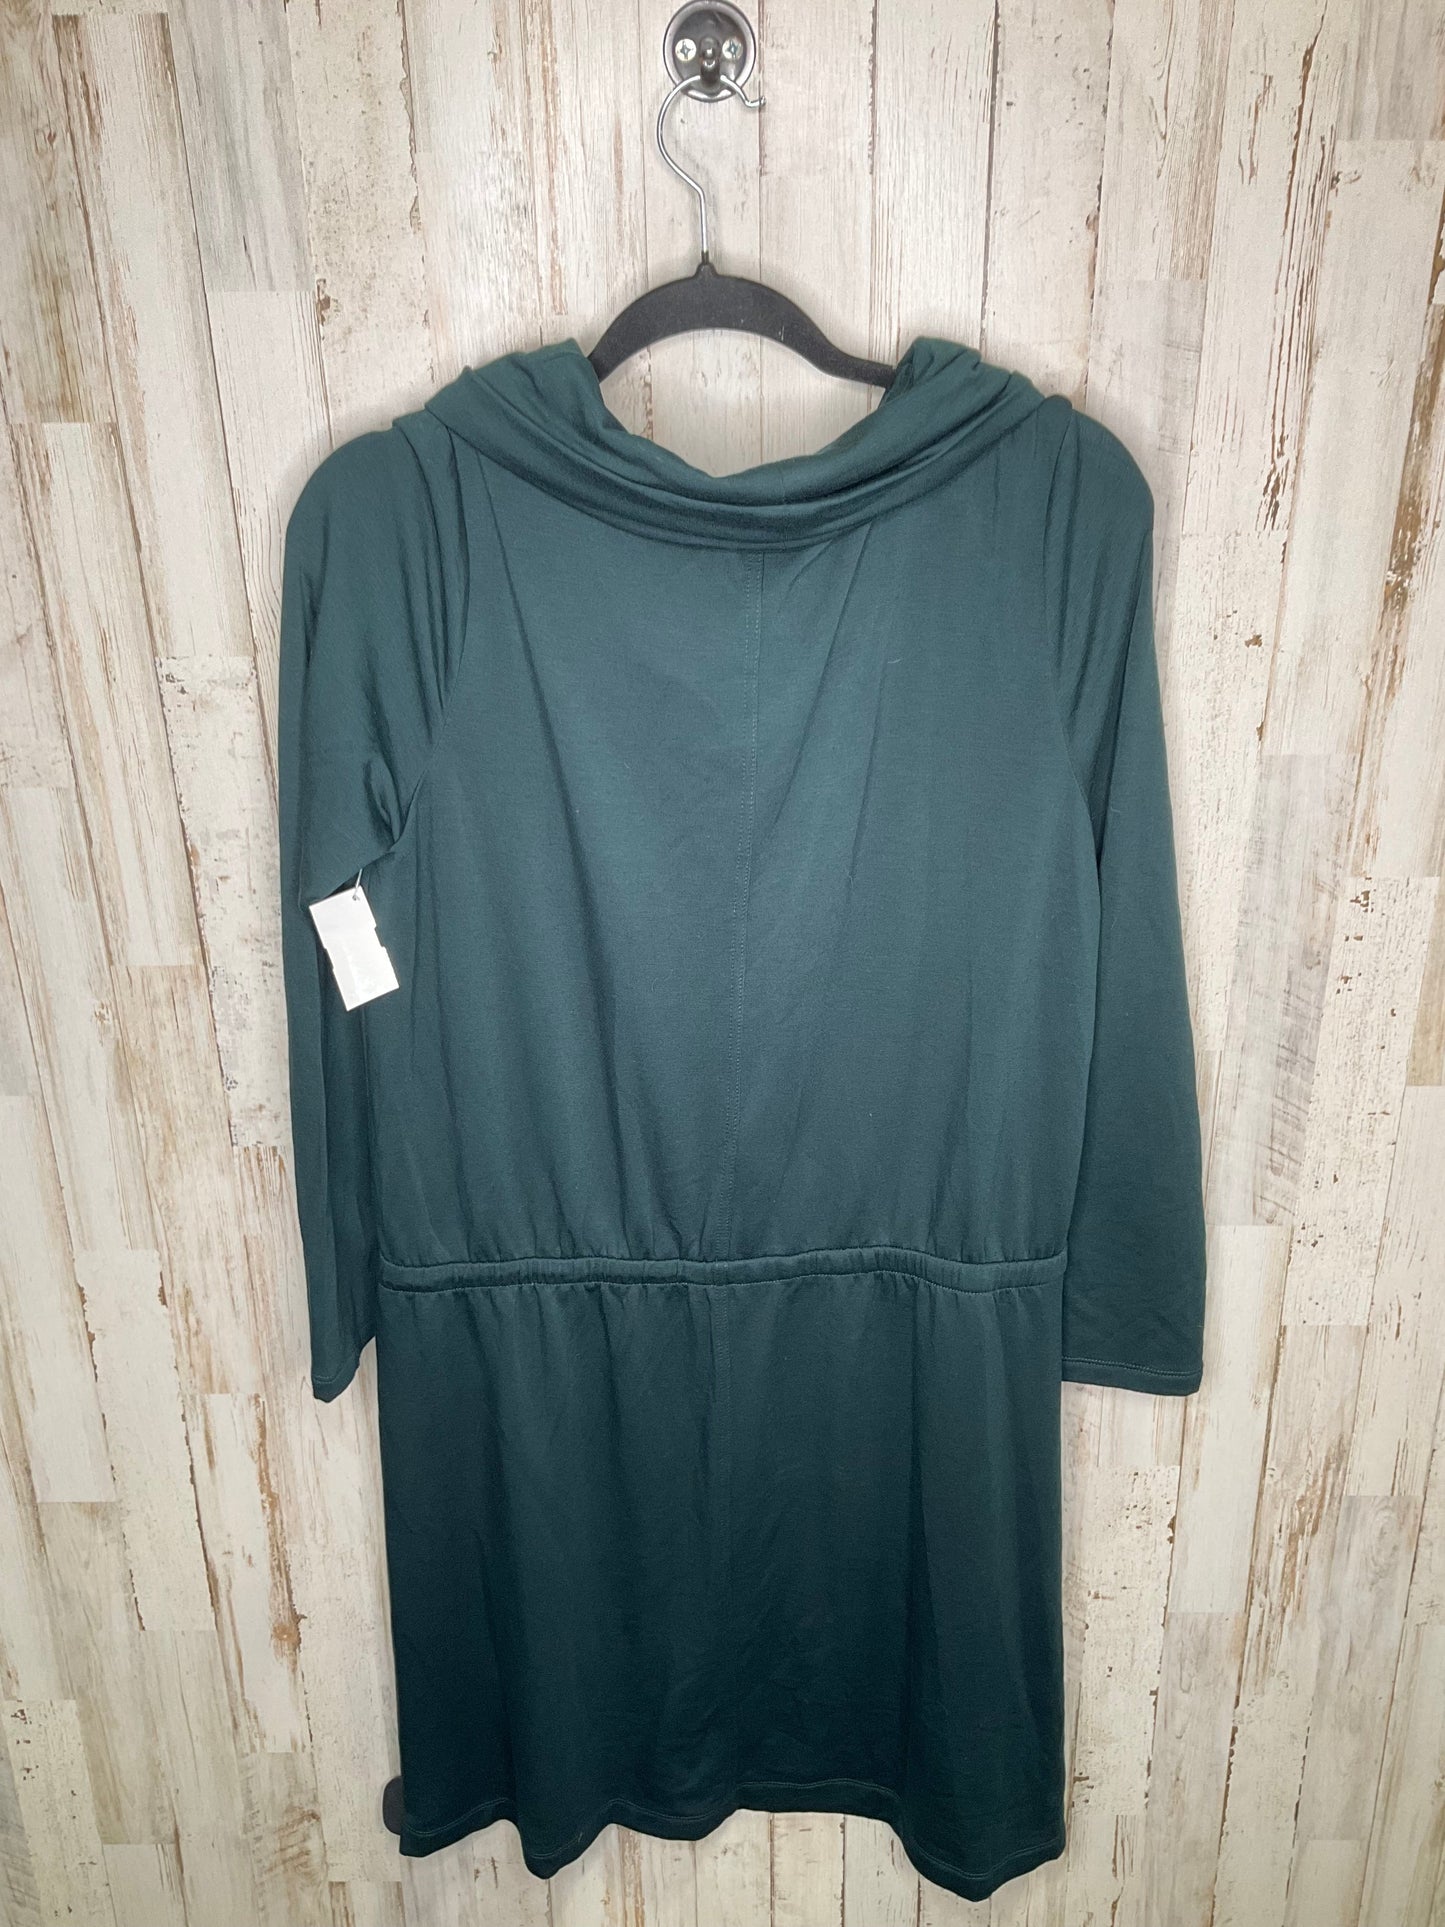 Green Dress Casual Short Lou And Grey, Size L